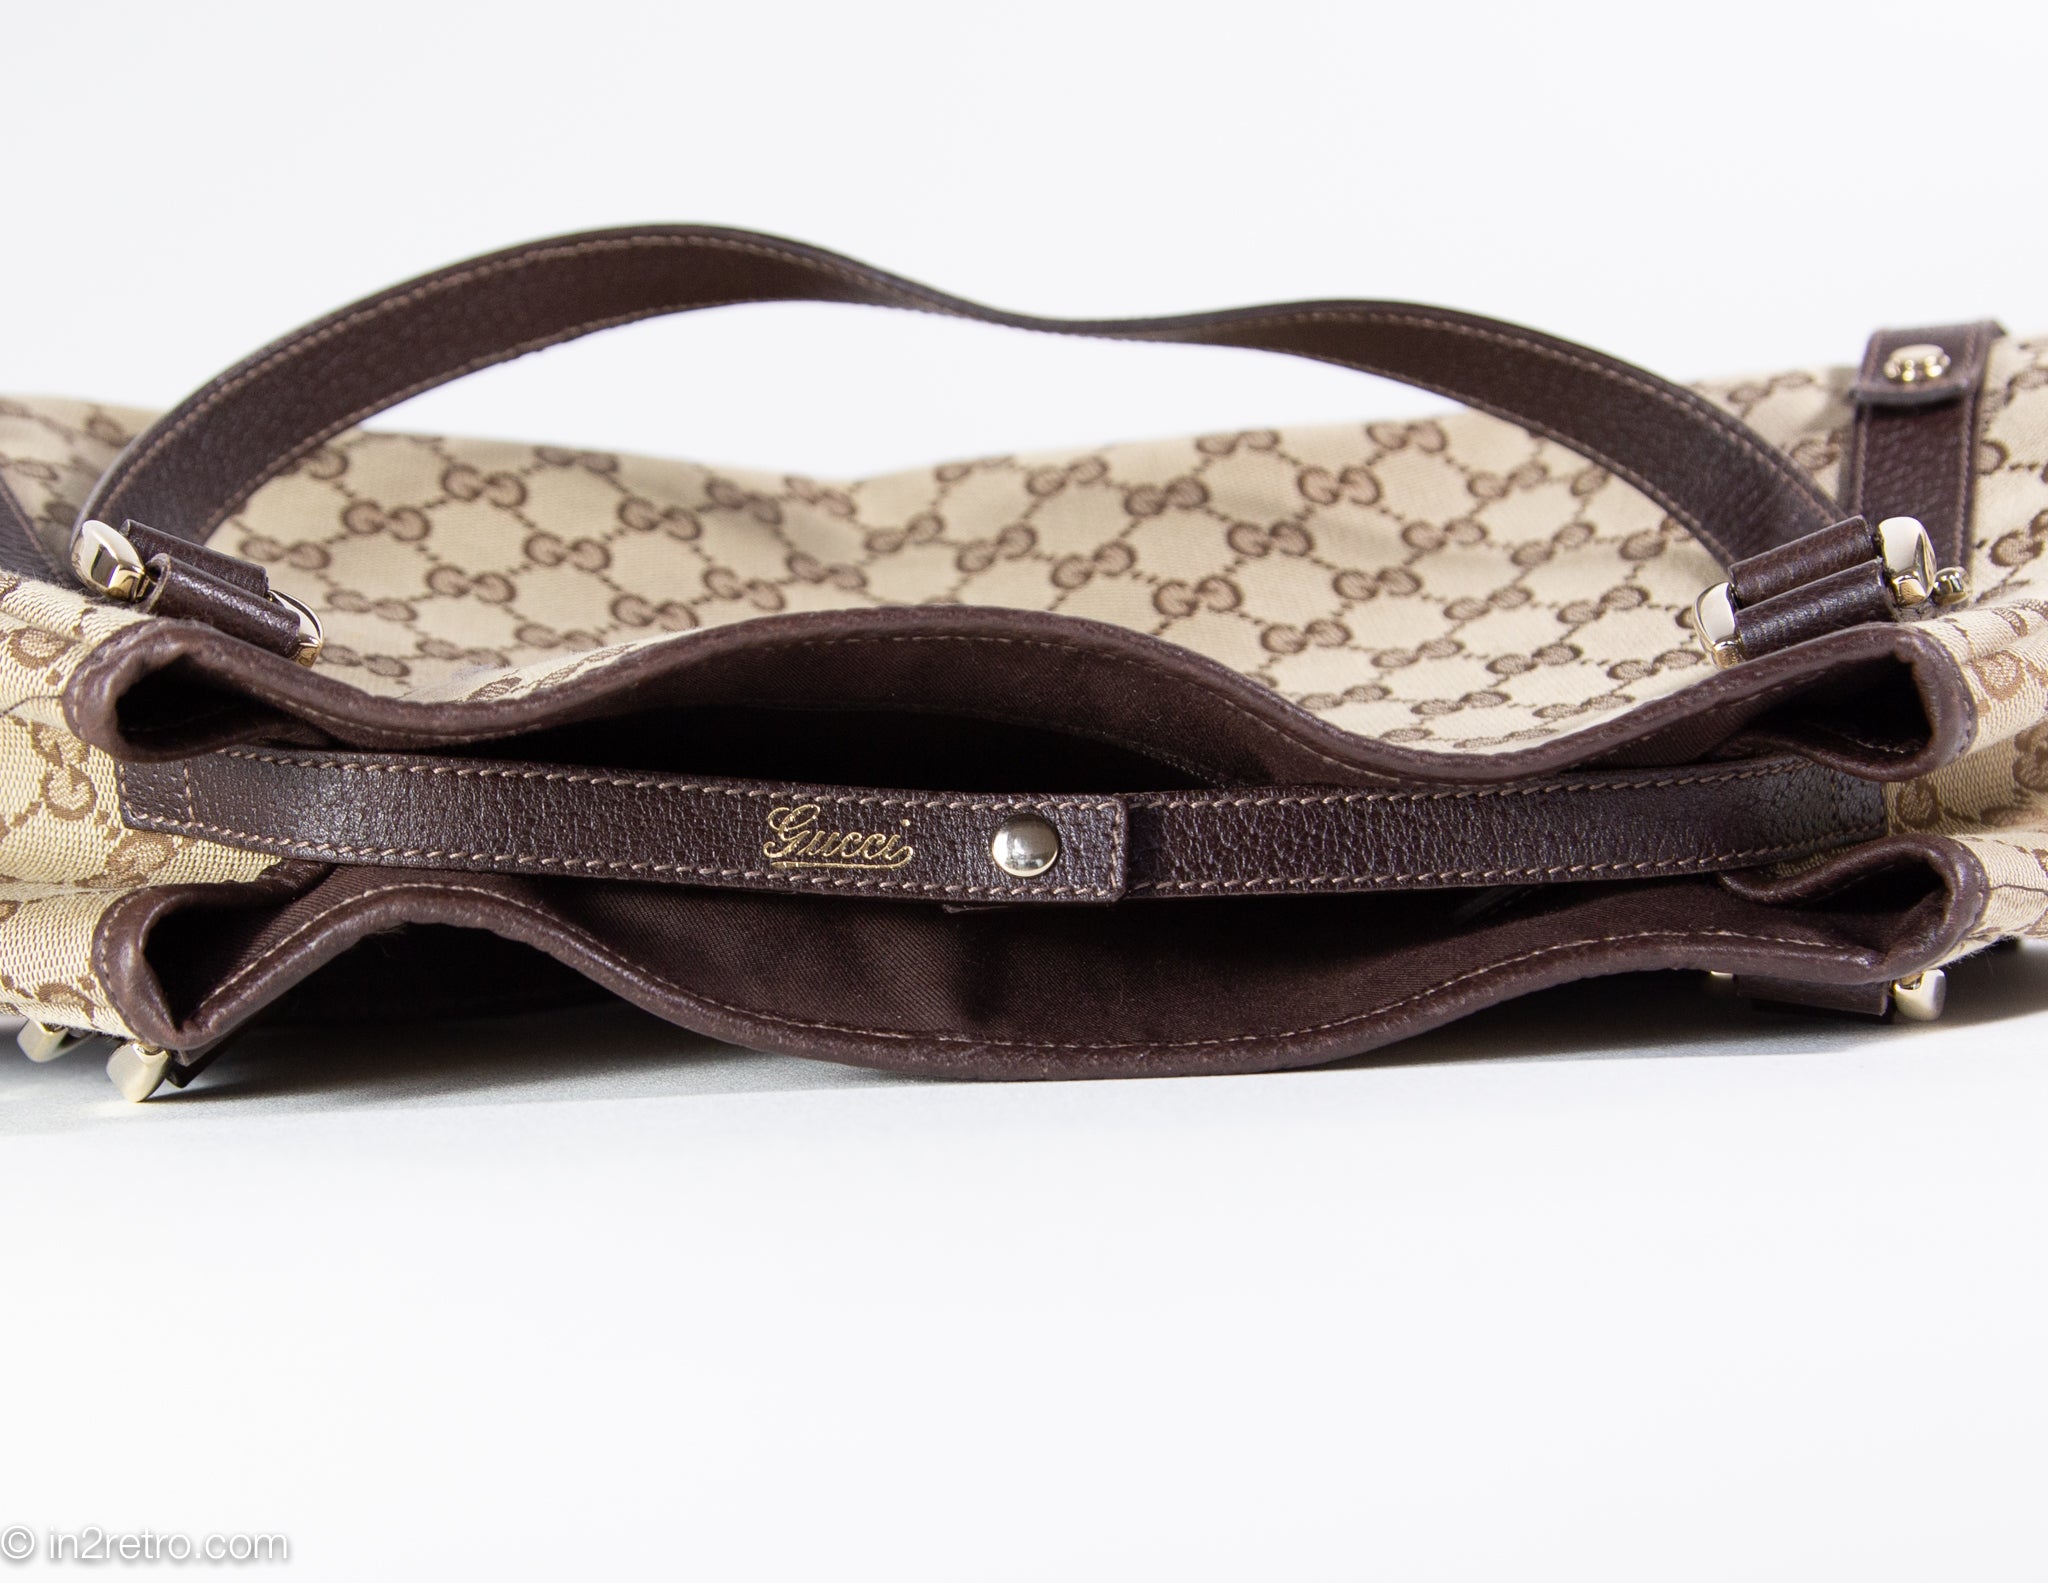 Italian medieval GUCCI leather and canvas Monogram logo one